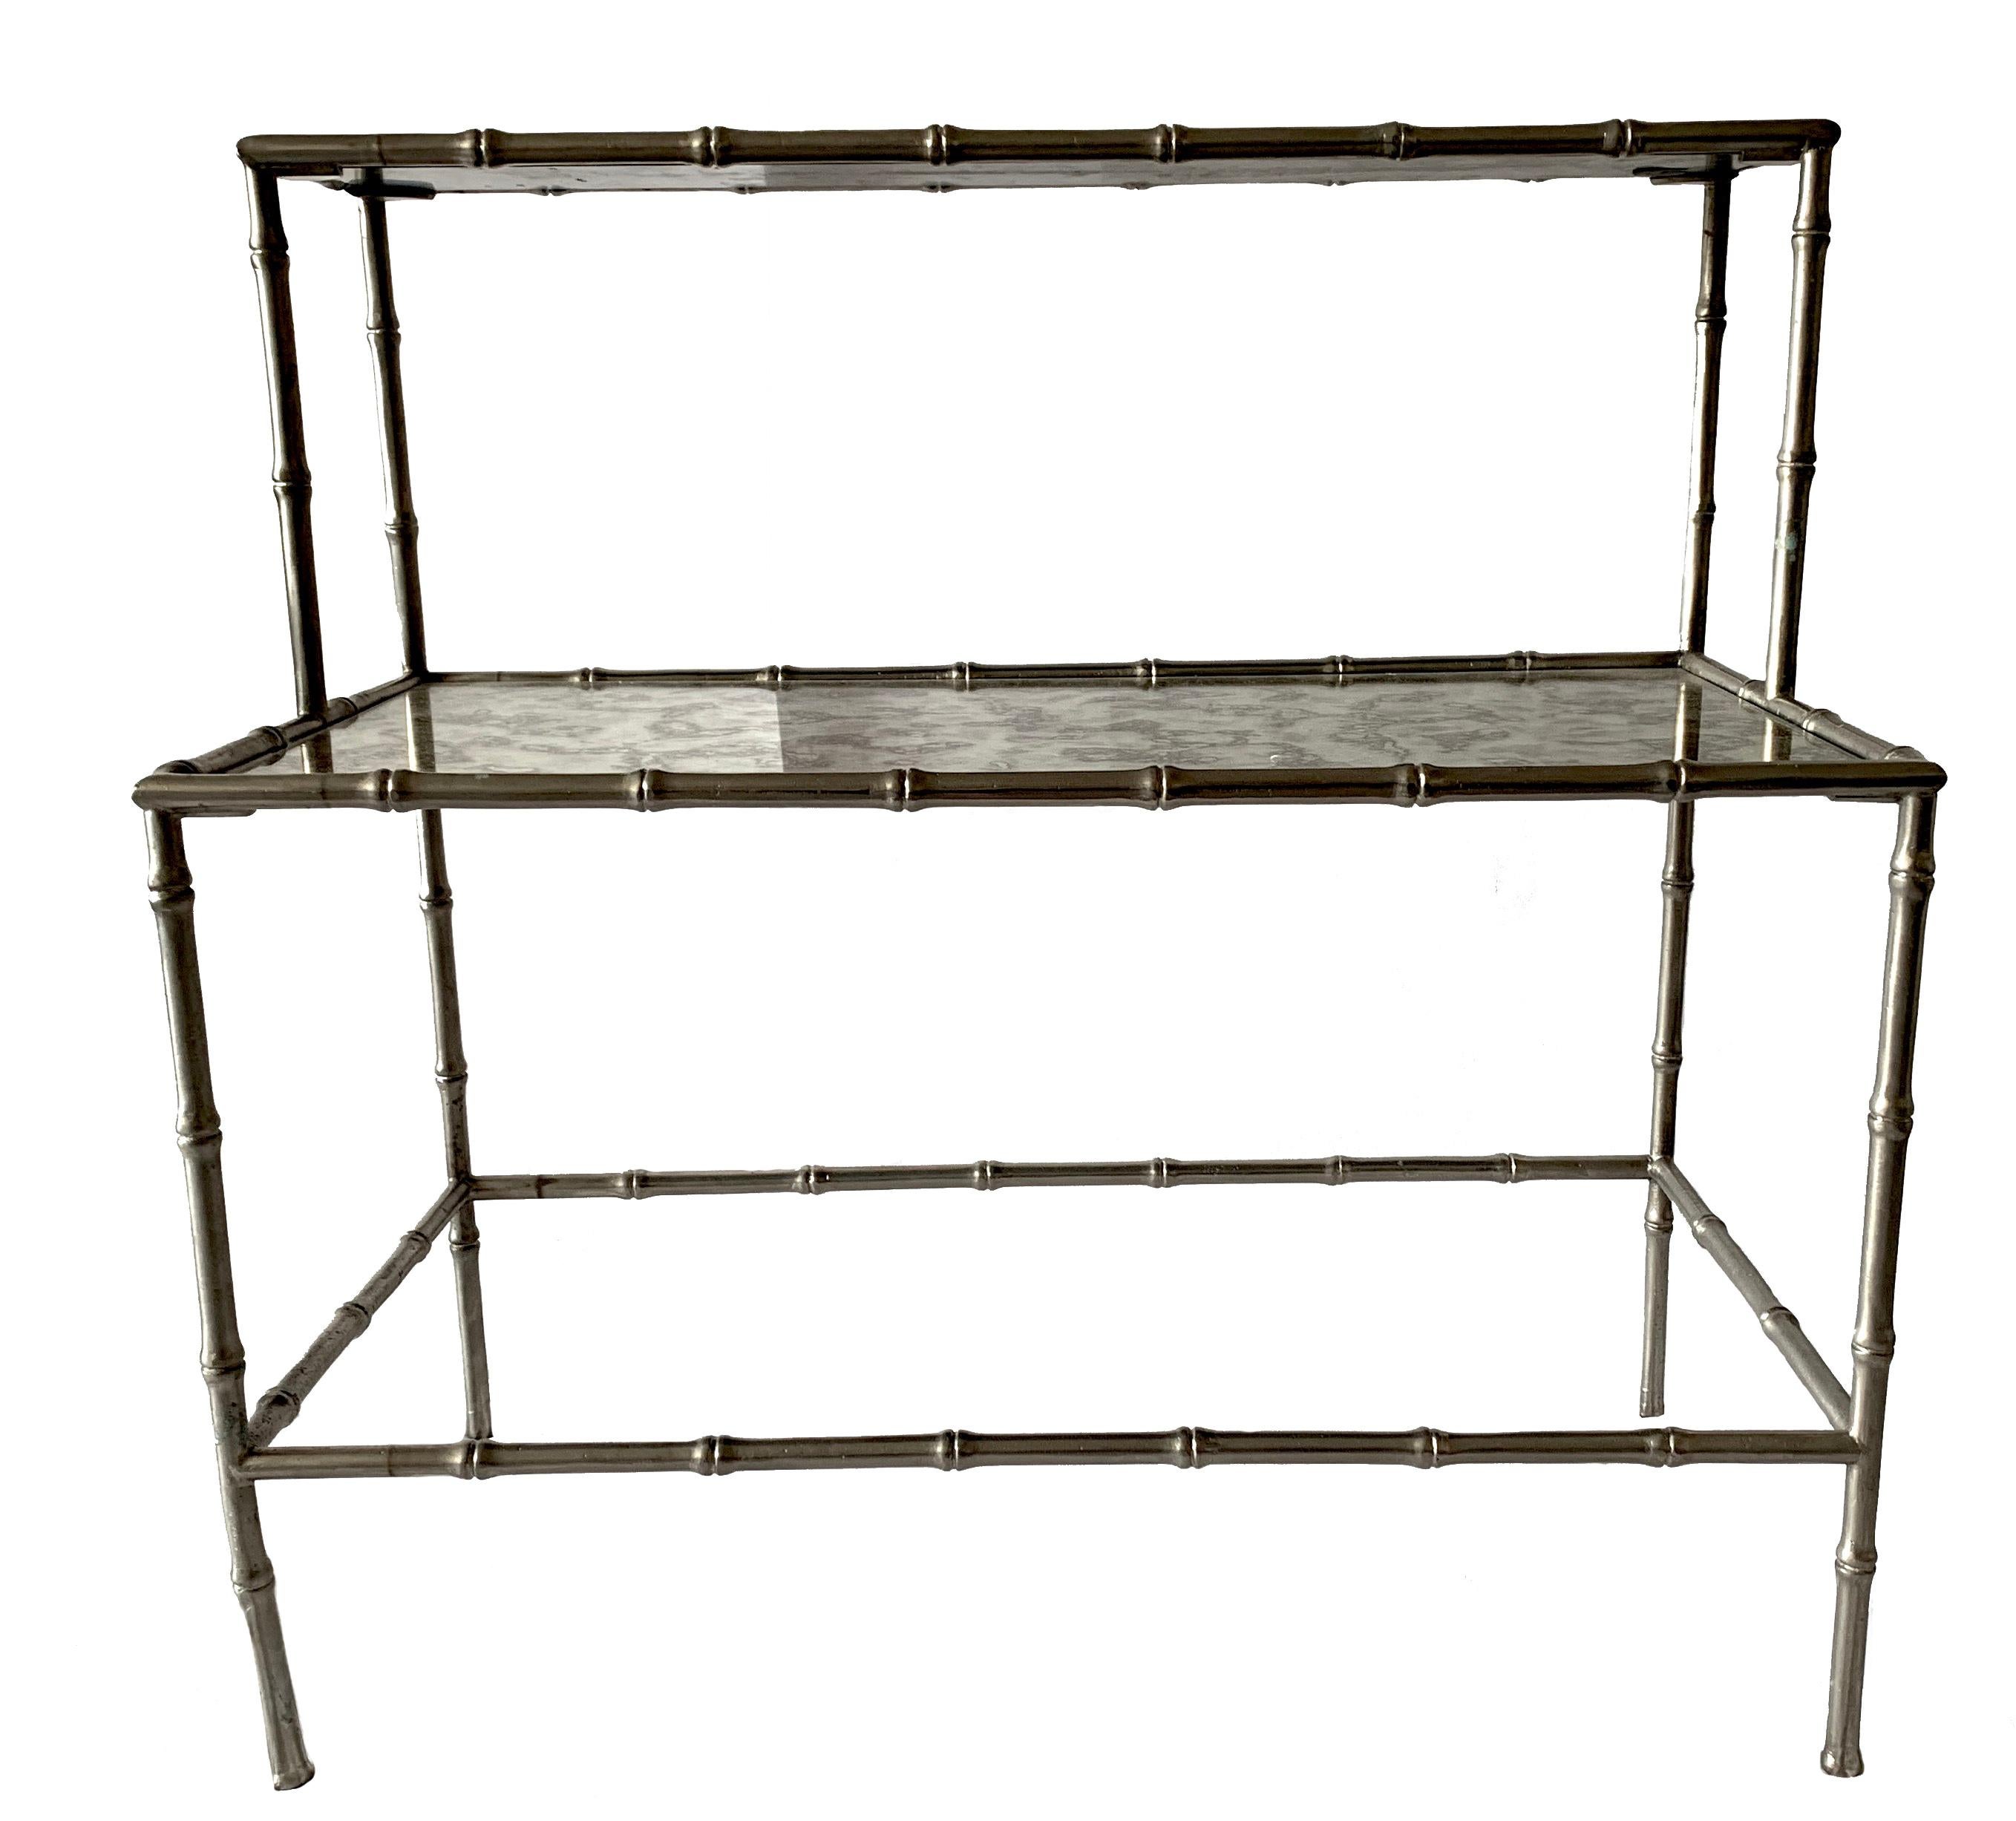 Maison Baguès attributed bamboo style two-tier table in polished nickel finish. Antique style mirrored glass top. Two-tier design. Measures: First tier is 16